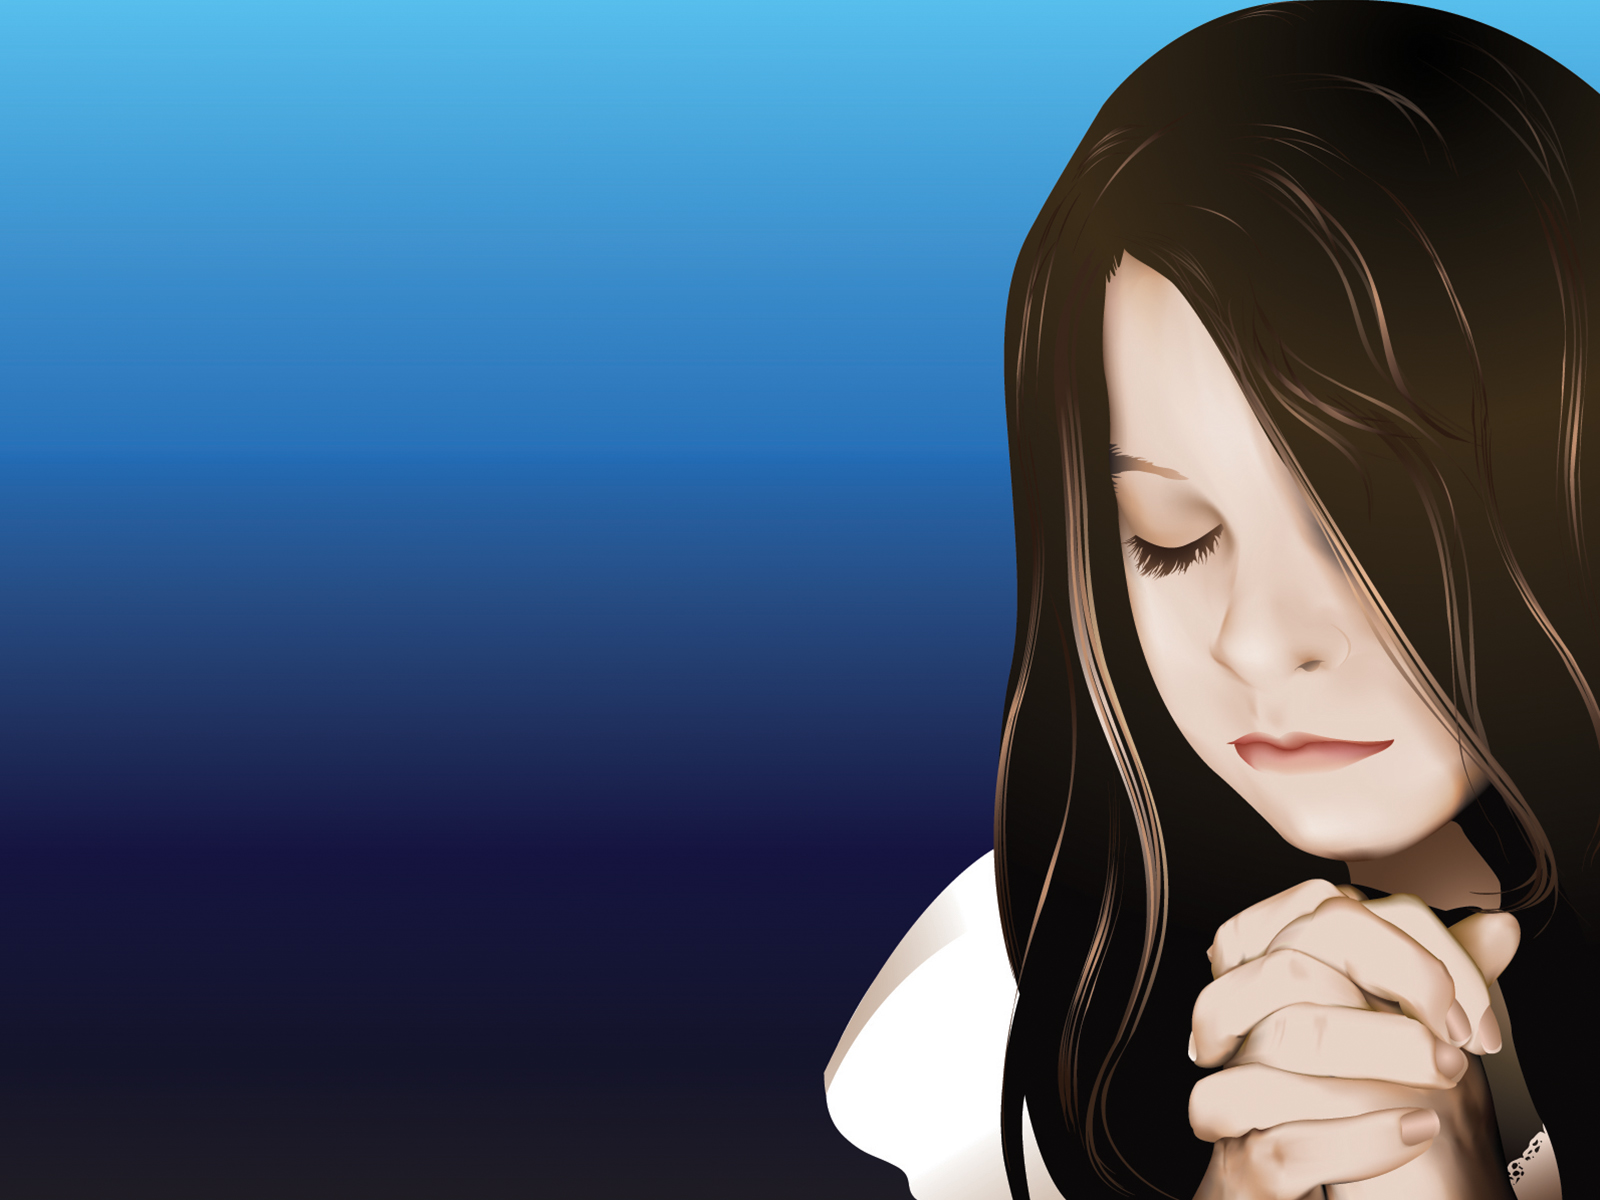 Praying Girl Powerpoint Templates - Black, Blue, Religious - Free PPT  Backgrounds and Templates